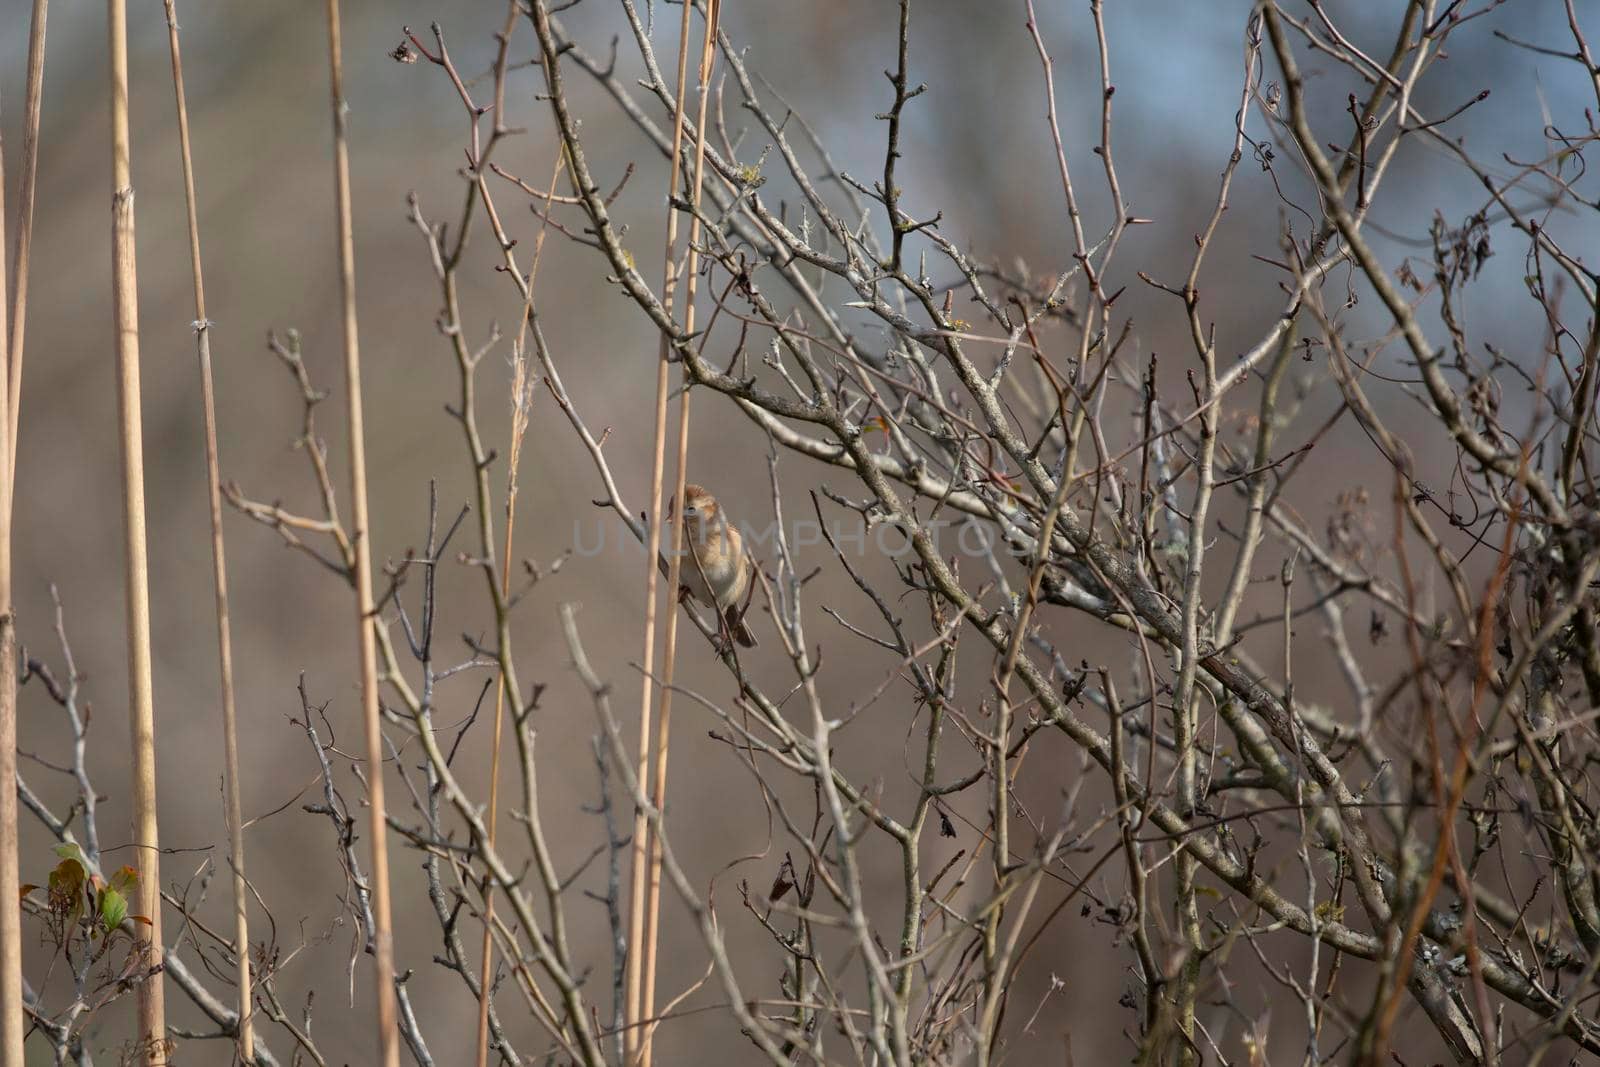 Field sparrow (Spizella pusilla) perched on a thin reed in a field